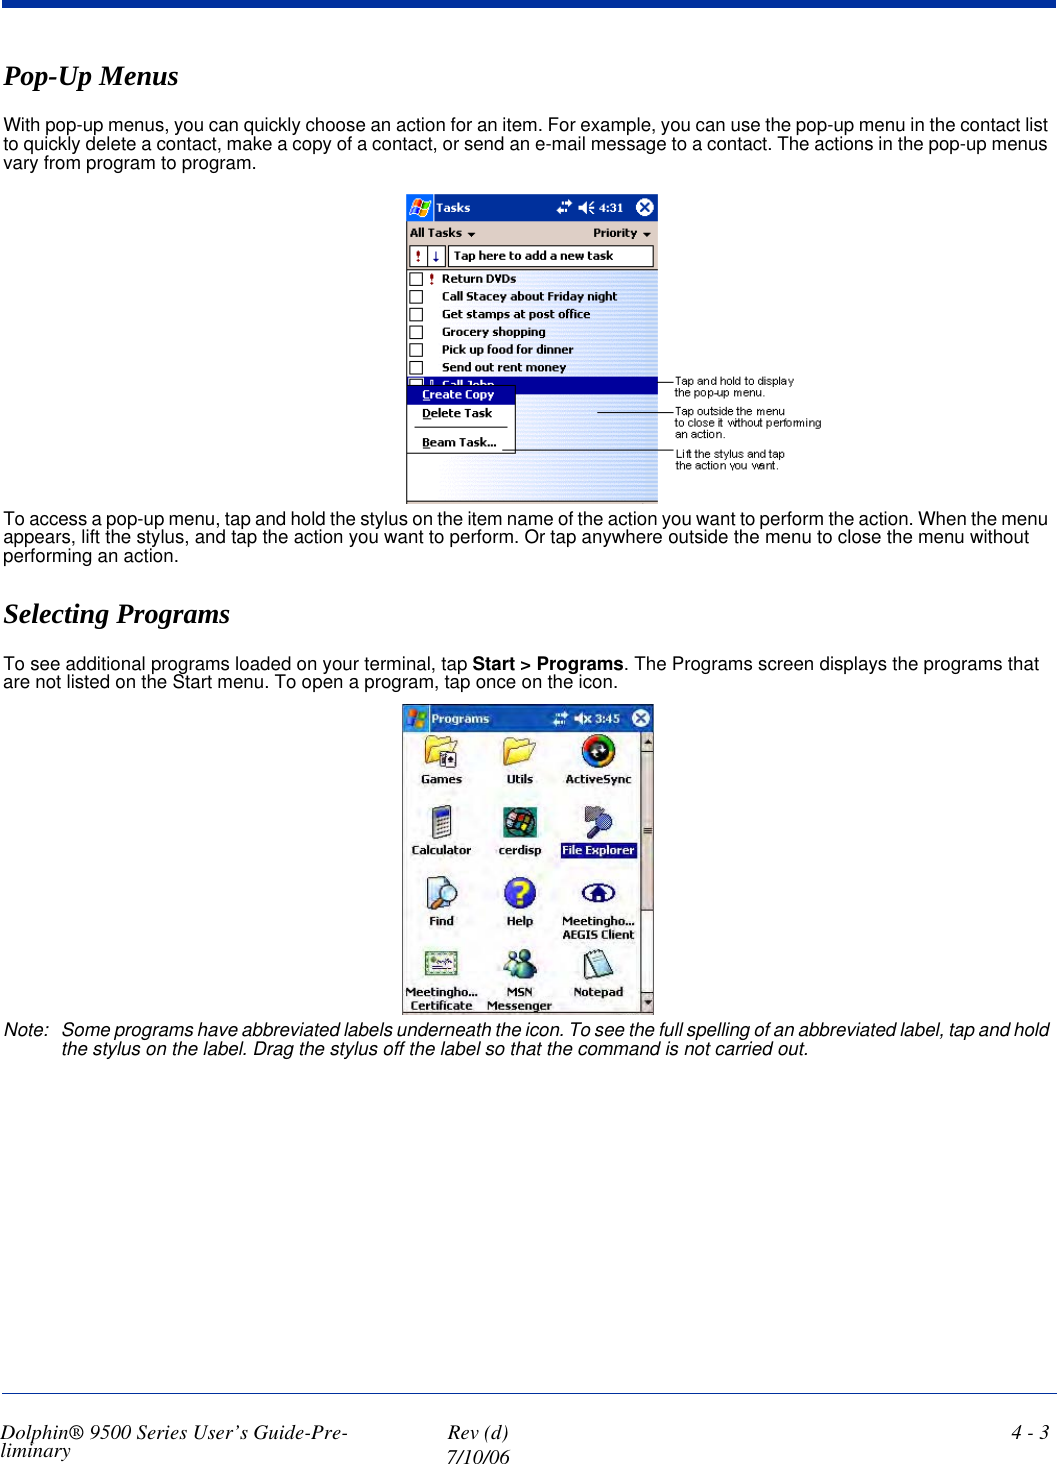 Dolphin® 9500 Series User’s Guide-Pre-liminary  Rev (d)7/10/064 - 3Pop-Up MenusWith pop-up menus, you can quickly choose an action for an item. For example, you can use the pop-up menu in the contact list to quickly delete a contact, make a copy of a contact, or send an e-mail message to a contact. The actions in the pop-up menus vary from program to program.To access a pop-up menu, tap and hold the stylus on the item name of the action you want to perform the action. When the menu appears, lift the stylus, and tap the action you want to perform. Or tap anywhere outside the menu to close the menu without performing an action.Selecting ProgramsTo see additional programs loaded on your terminal, tap Start &gt; Programs. The Programs screen displays the programs that are not listed on the Start menu. To open a program, tap once on the icon.Note: Some programs have abbreviated labels underneath the icon. To see the full spelling of an abbreviated label, tap and hold the stylus on the label. Drag the stylus off the label so that the command is not carried out. 